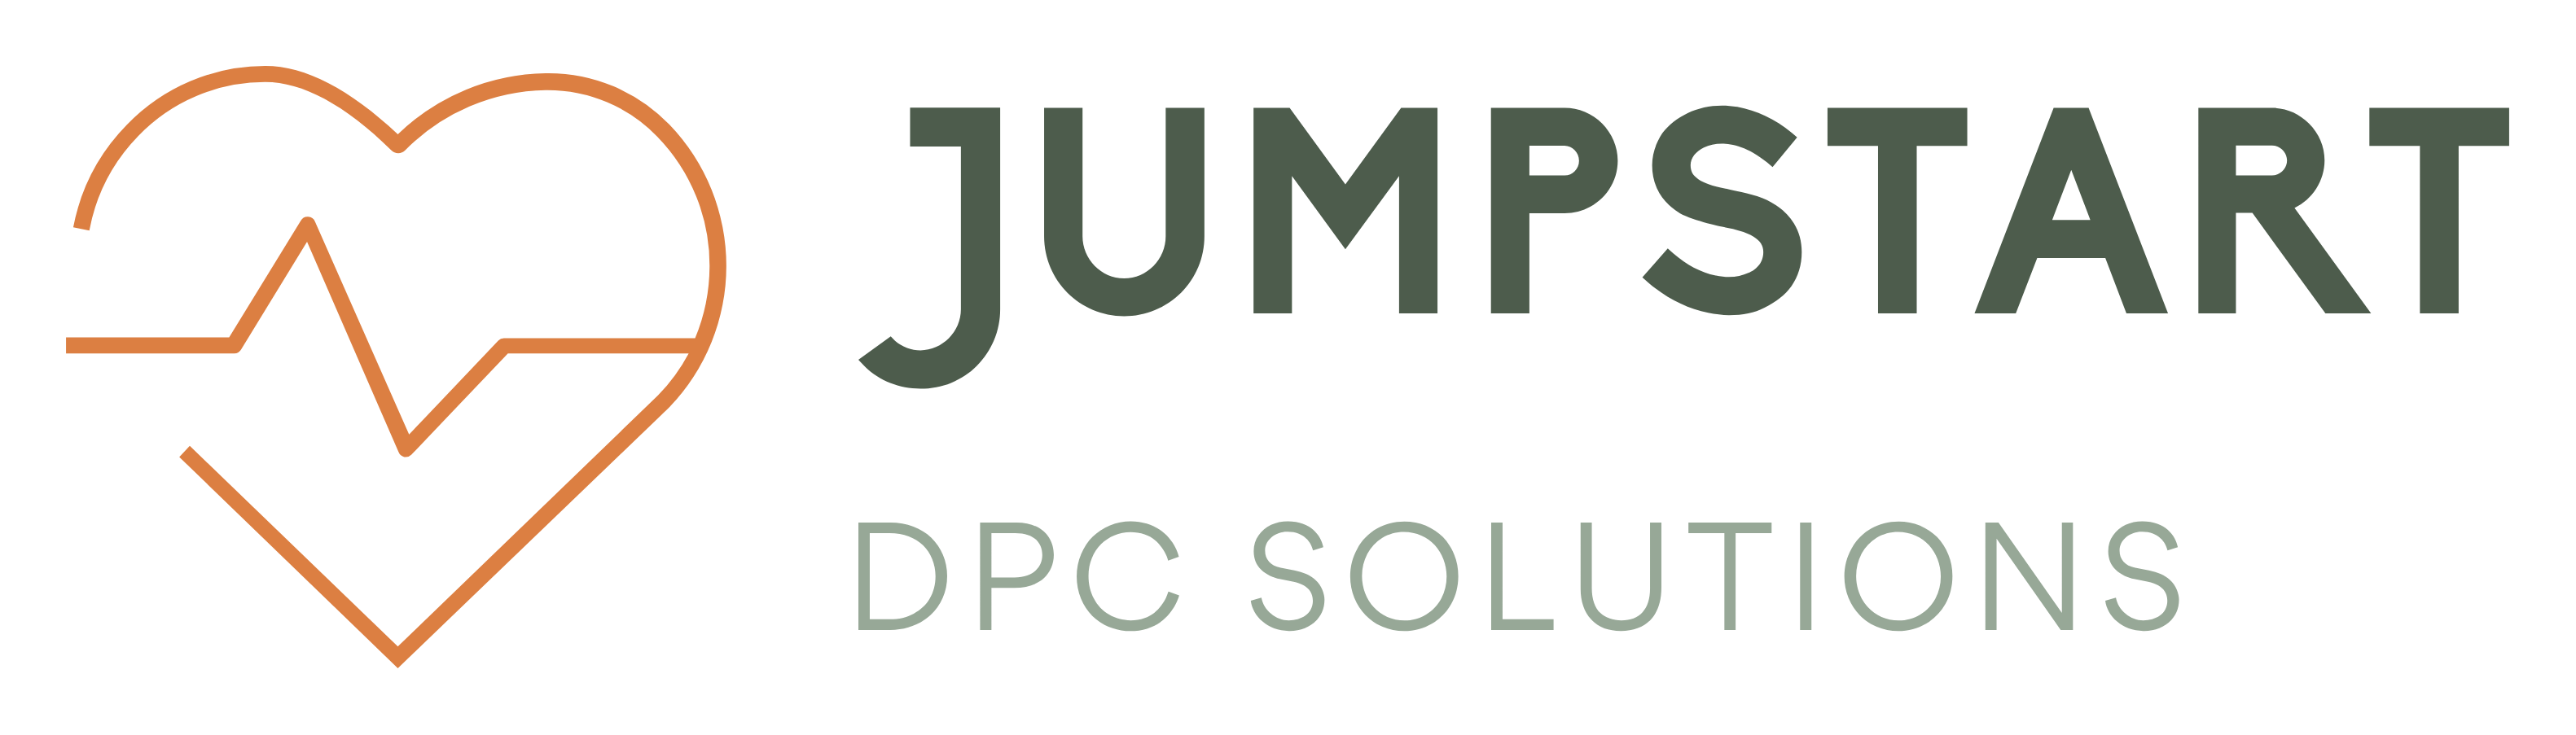 Jumpstart your DPC practice with innovative marketing solutions.